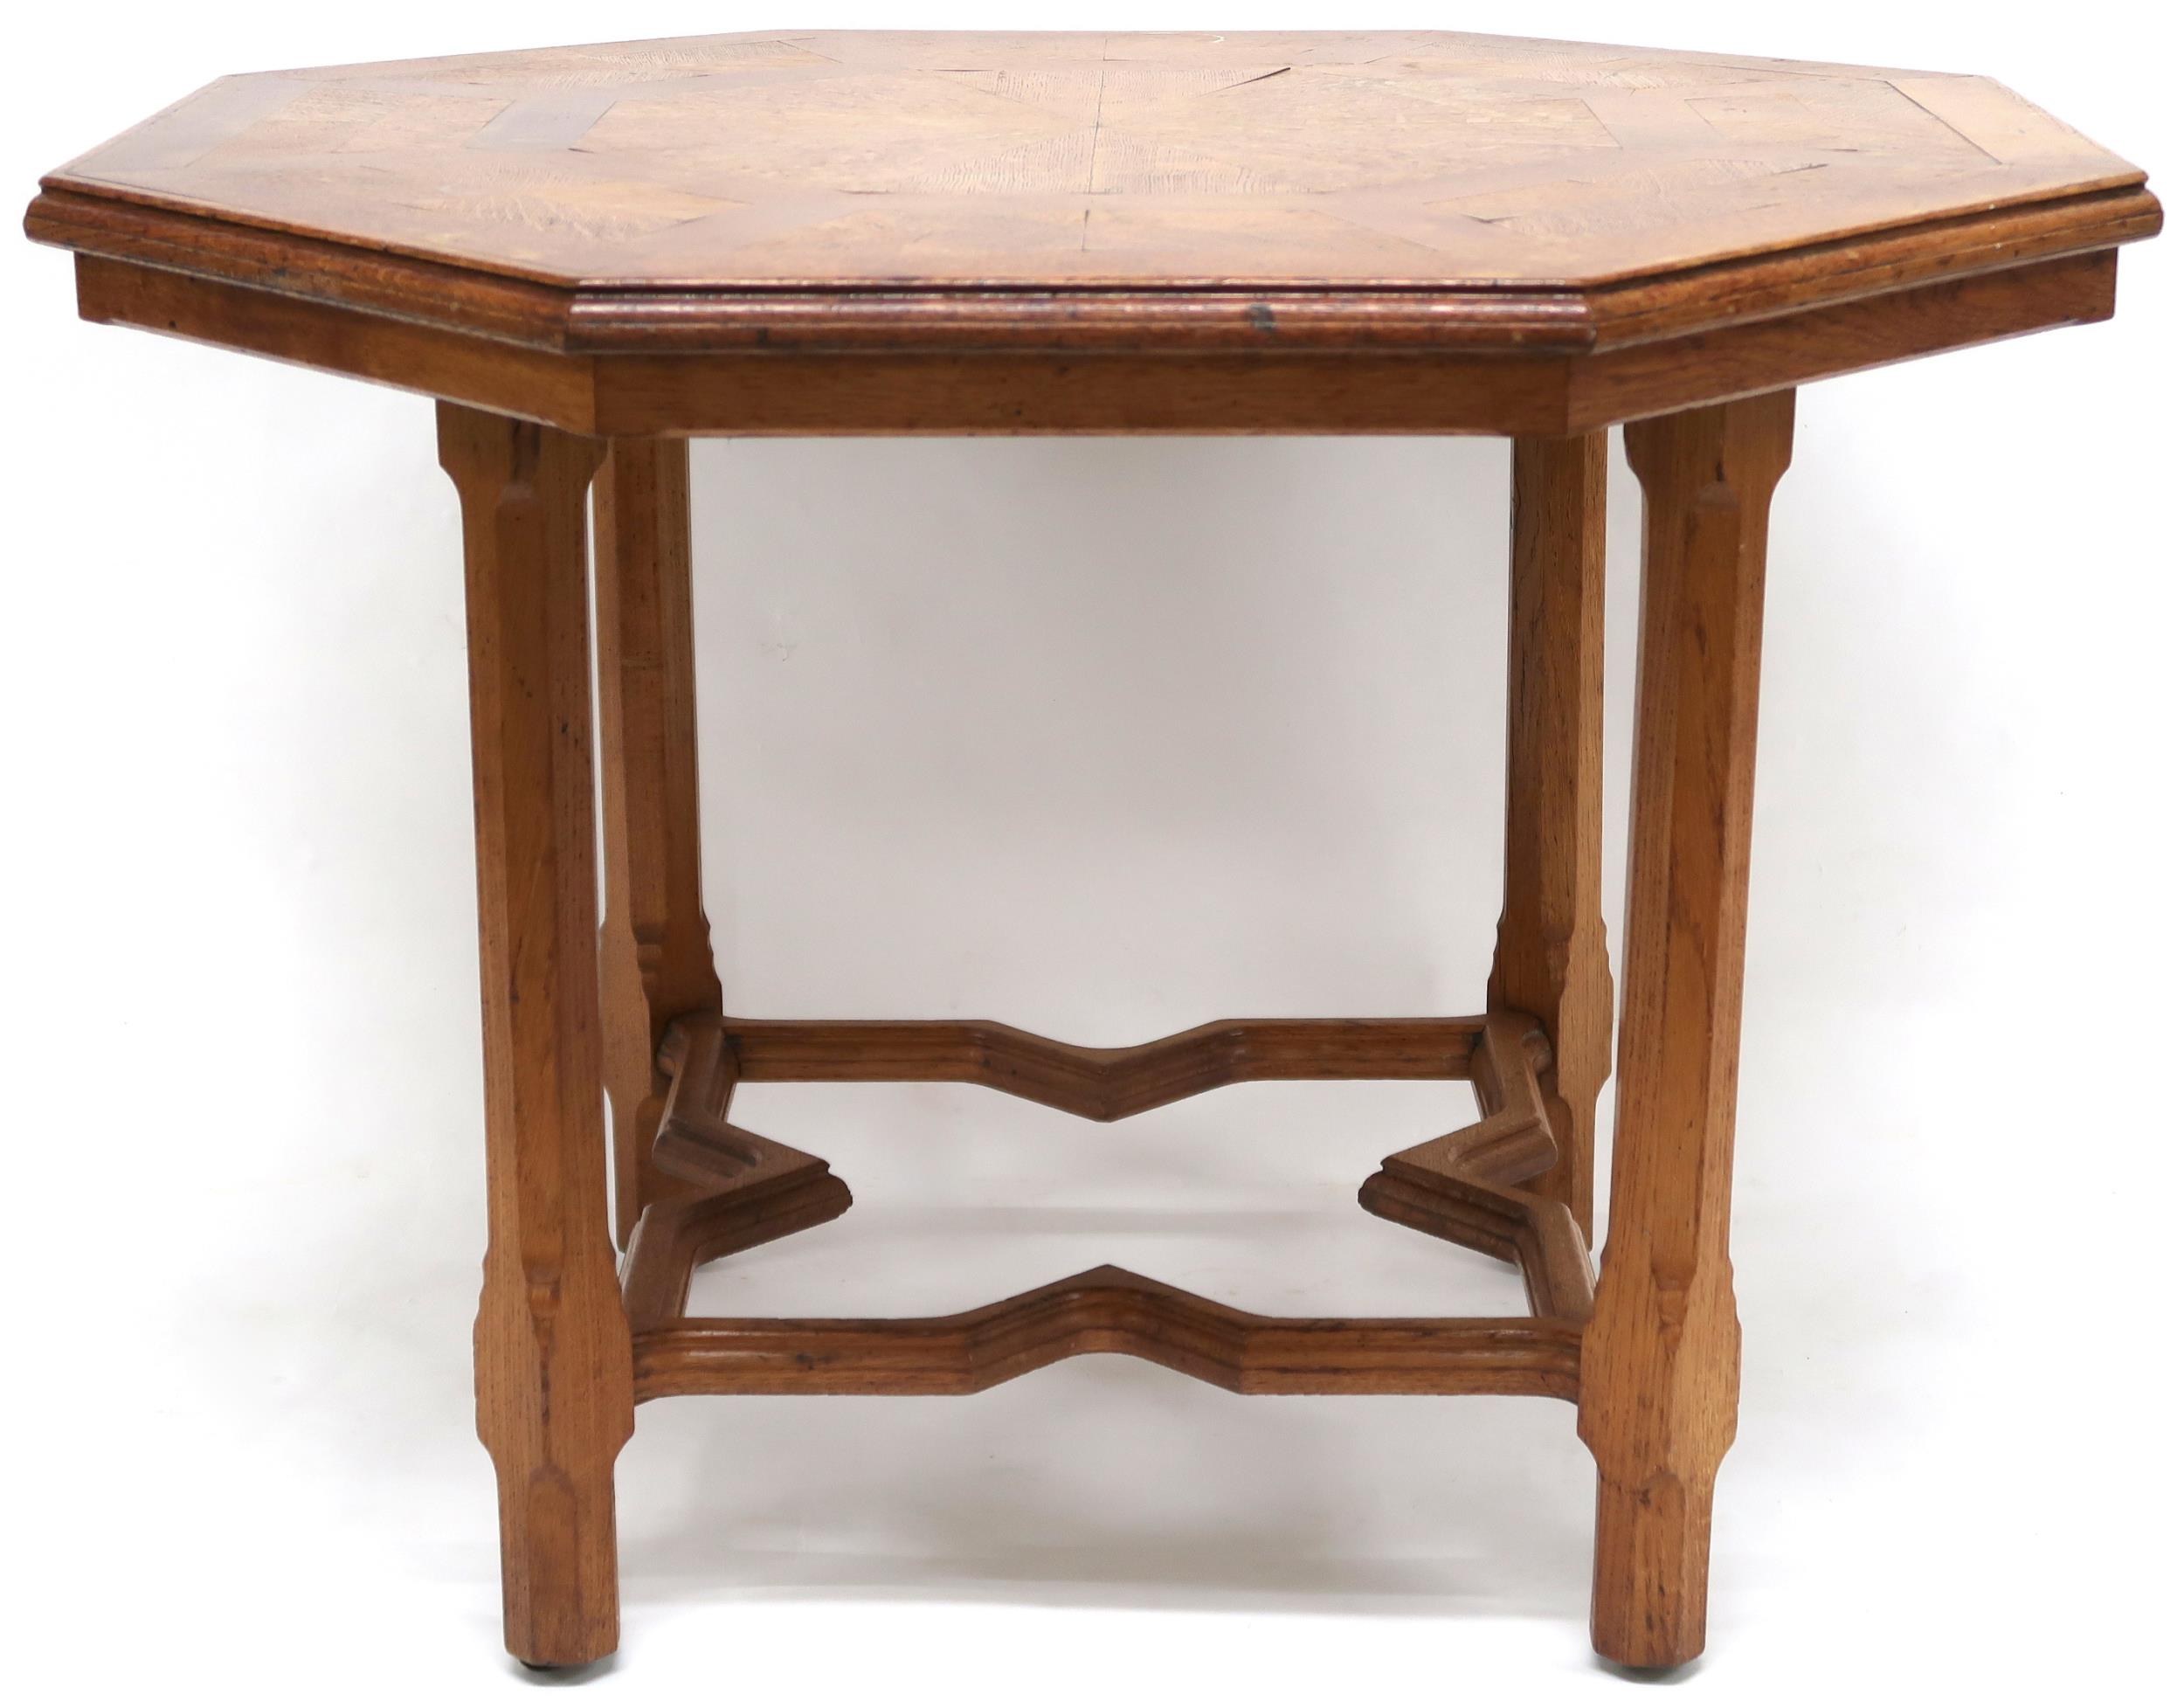 A VICTORIAN OAK PARQUETRY INLAID HOWARD & SONS LONDON OCTAGONAL CENTRE TABLE  with inlaid